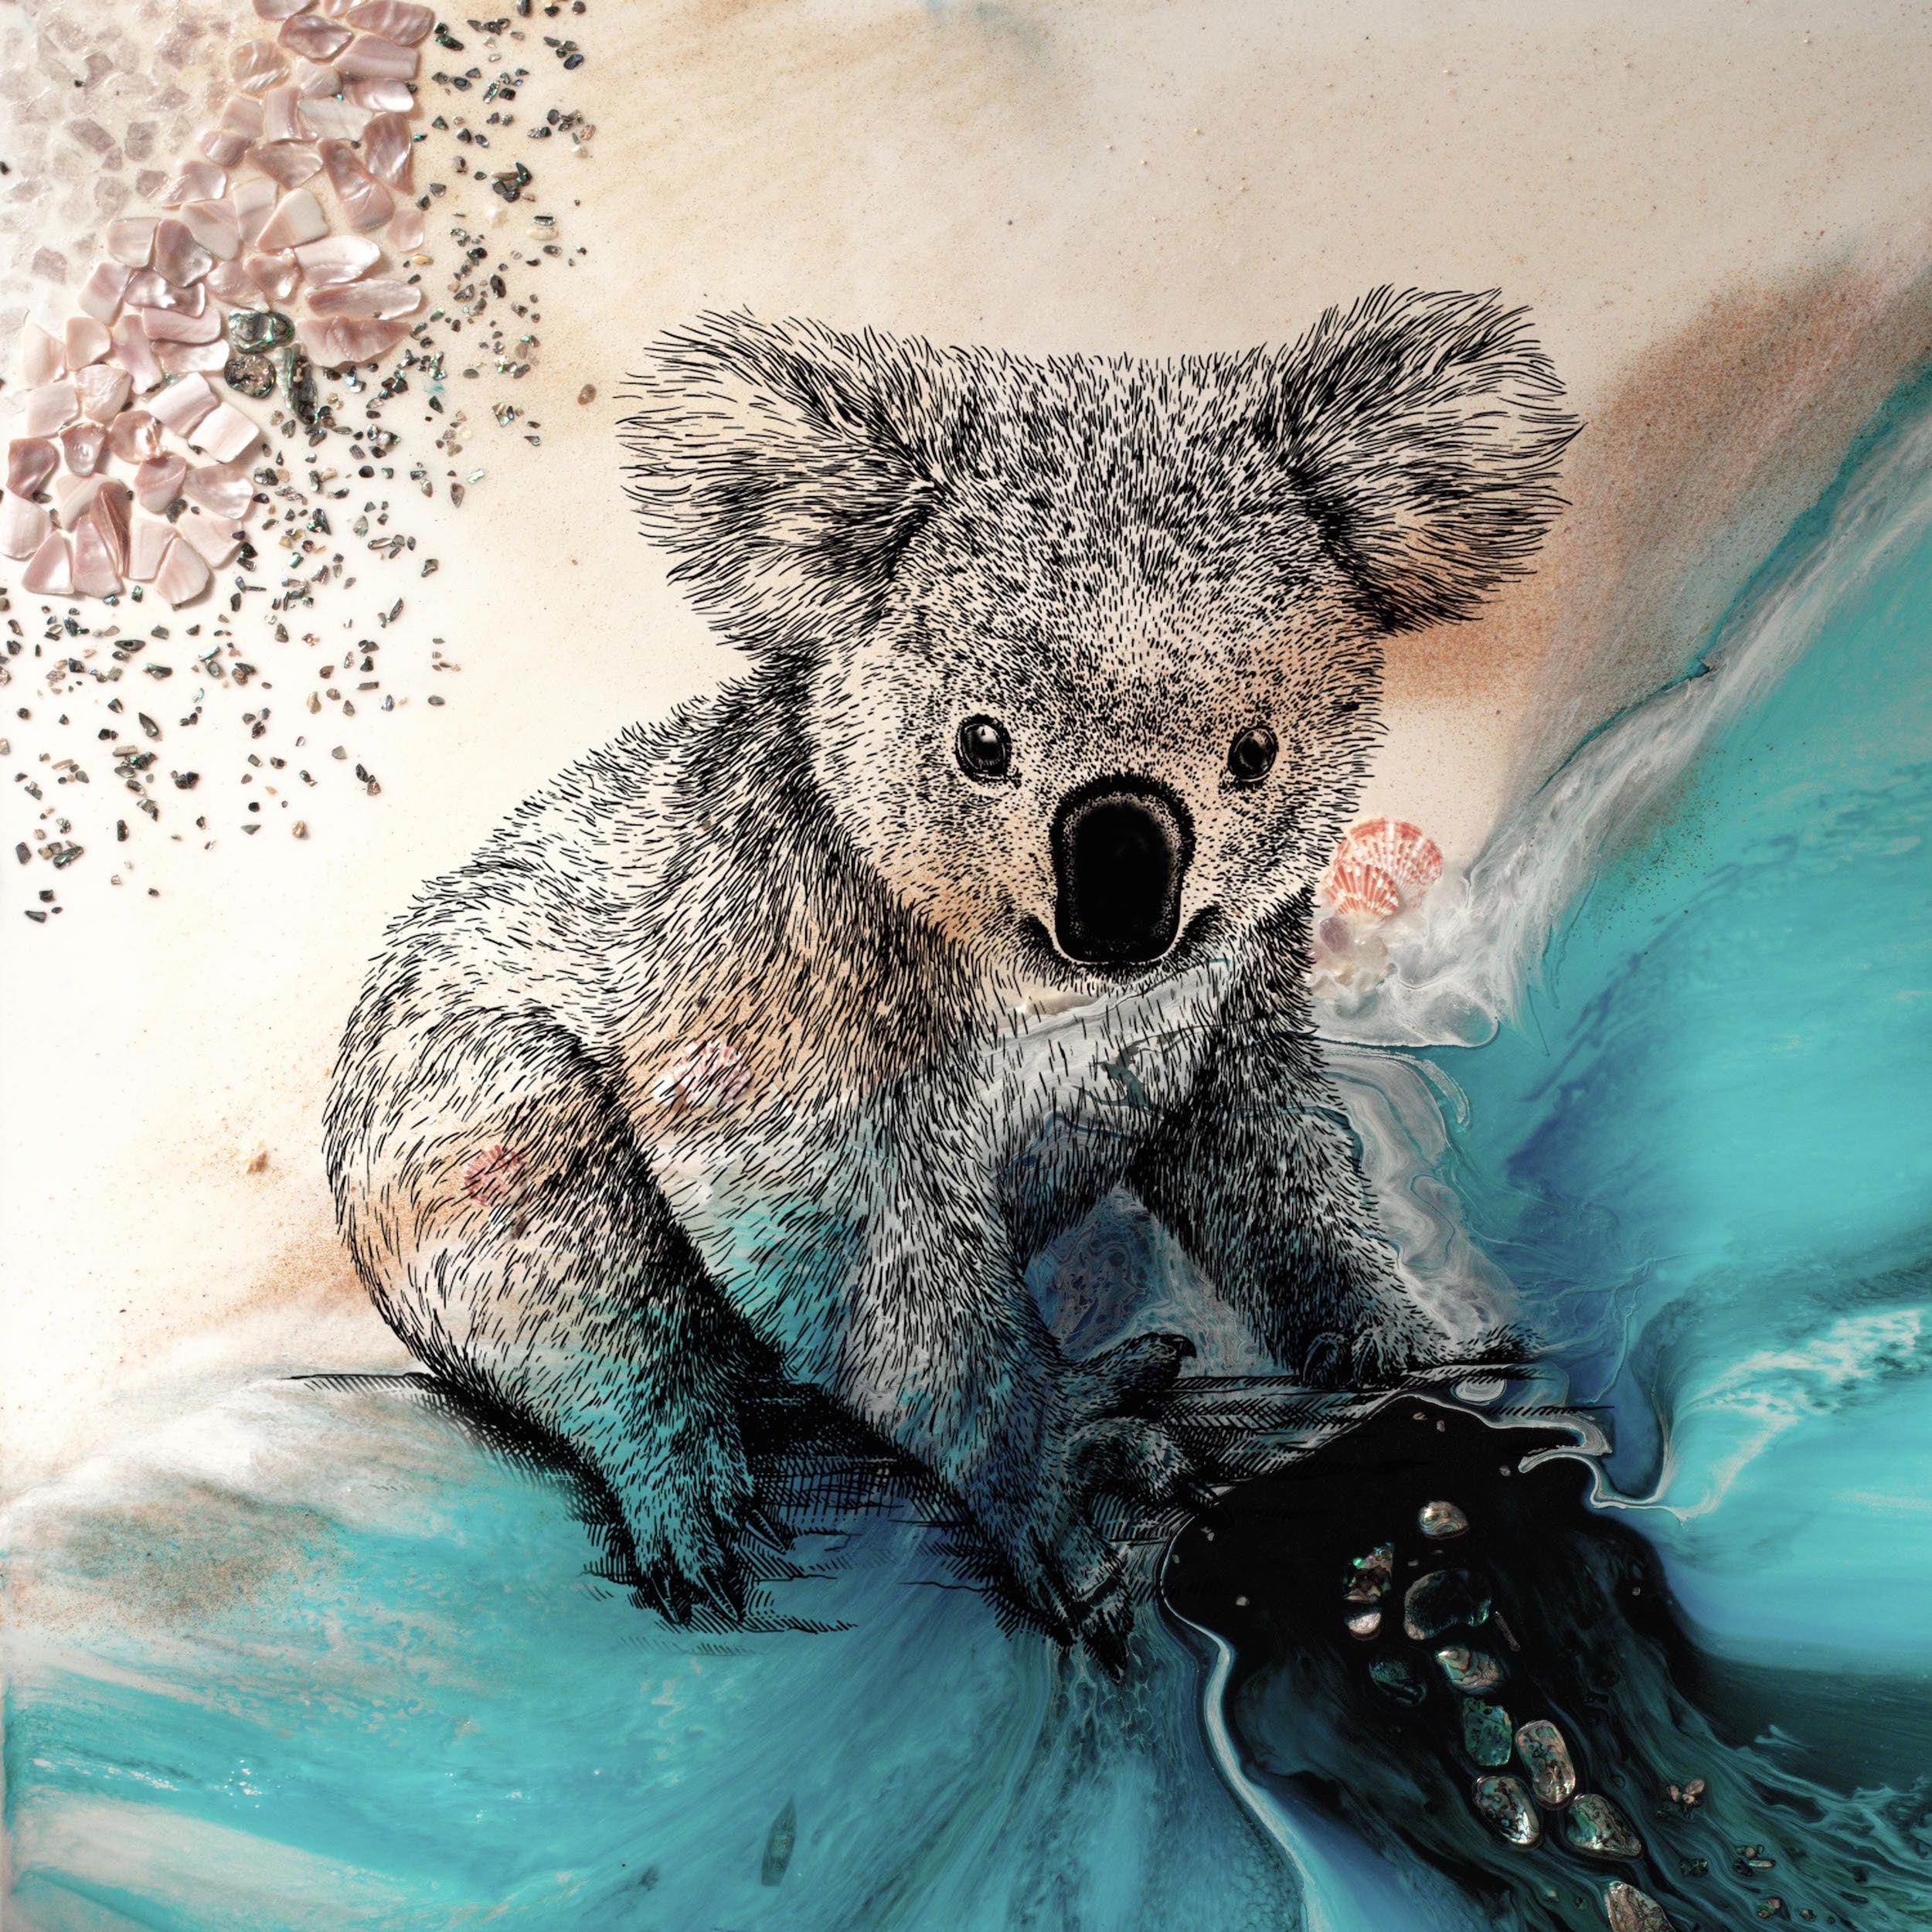 Abstract Ocean. Blue beach with Koala. Art Print. Antuanelle 1 Print for WWF Koala Conservation. Limited Edition